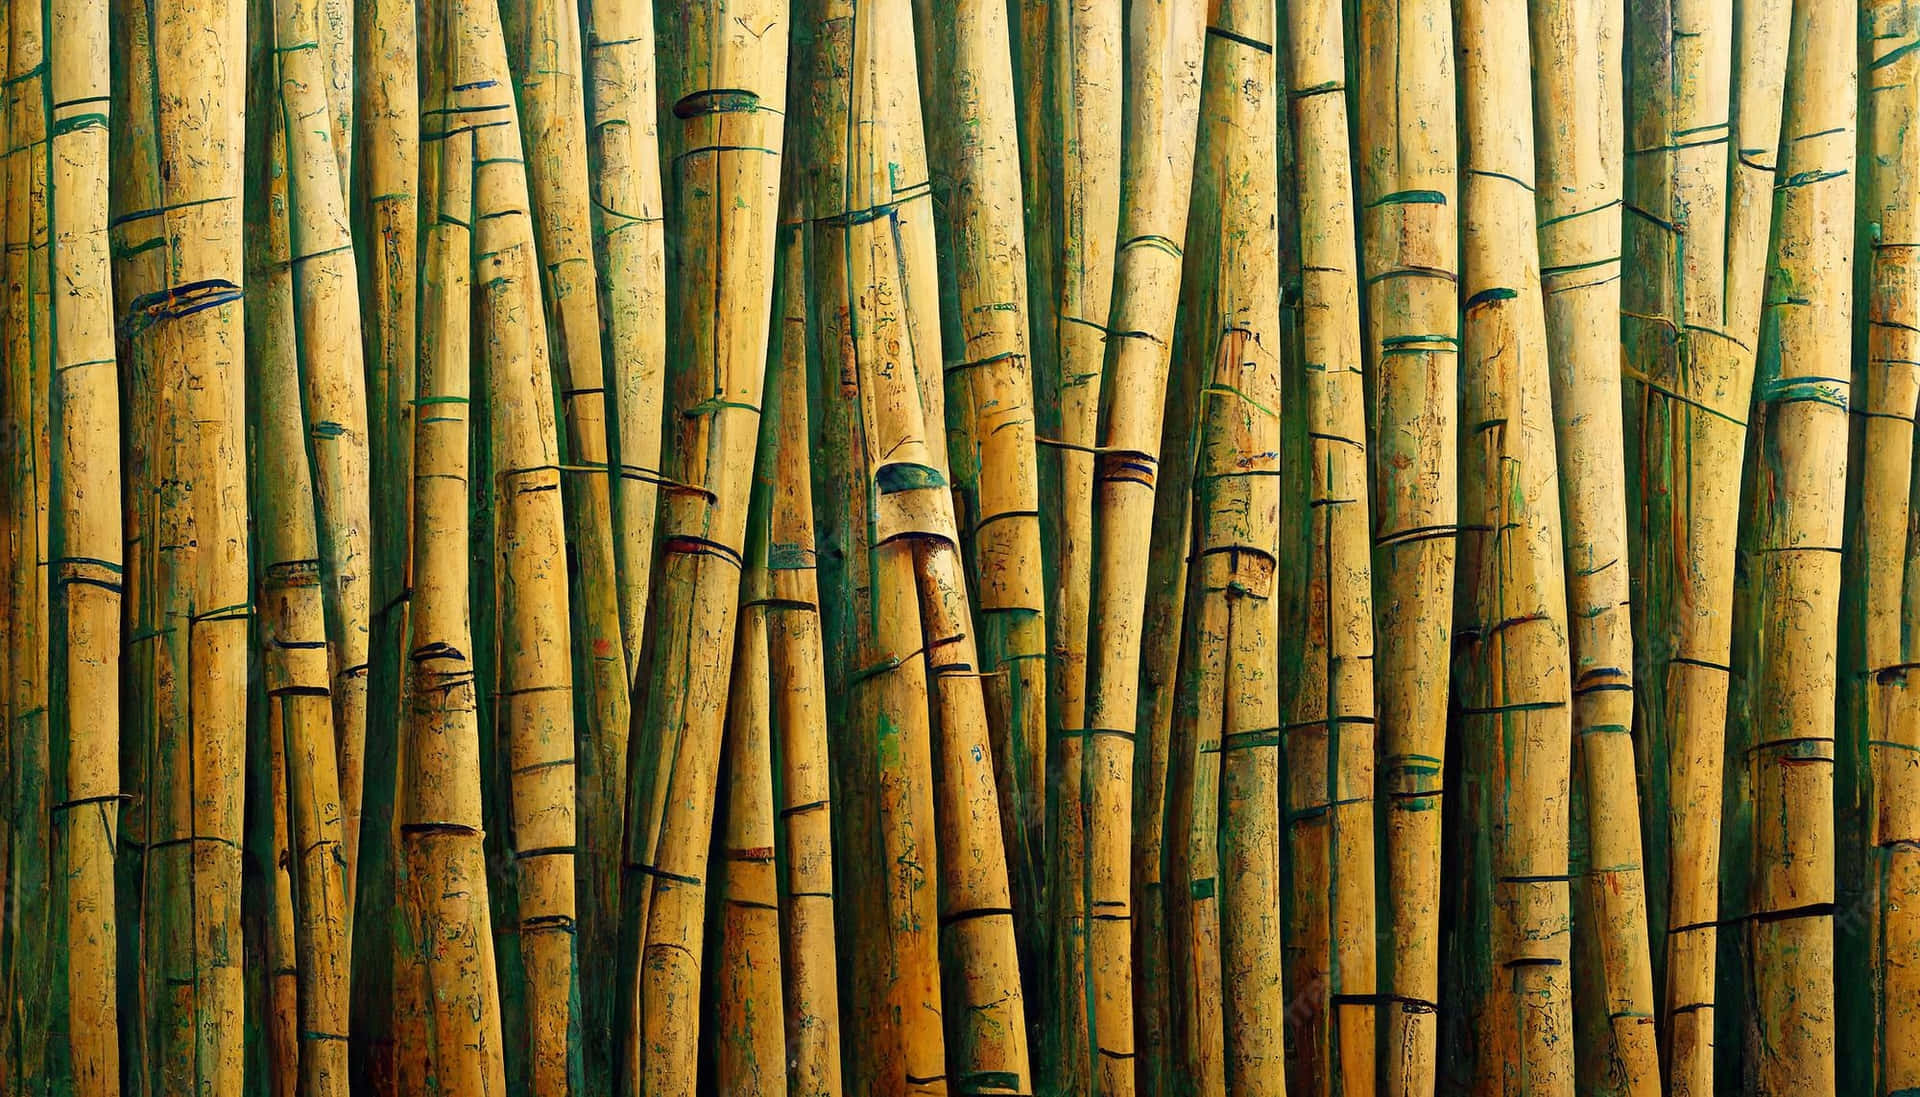 Peaceful And Serene View Of A Bamboo Forest